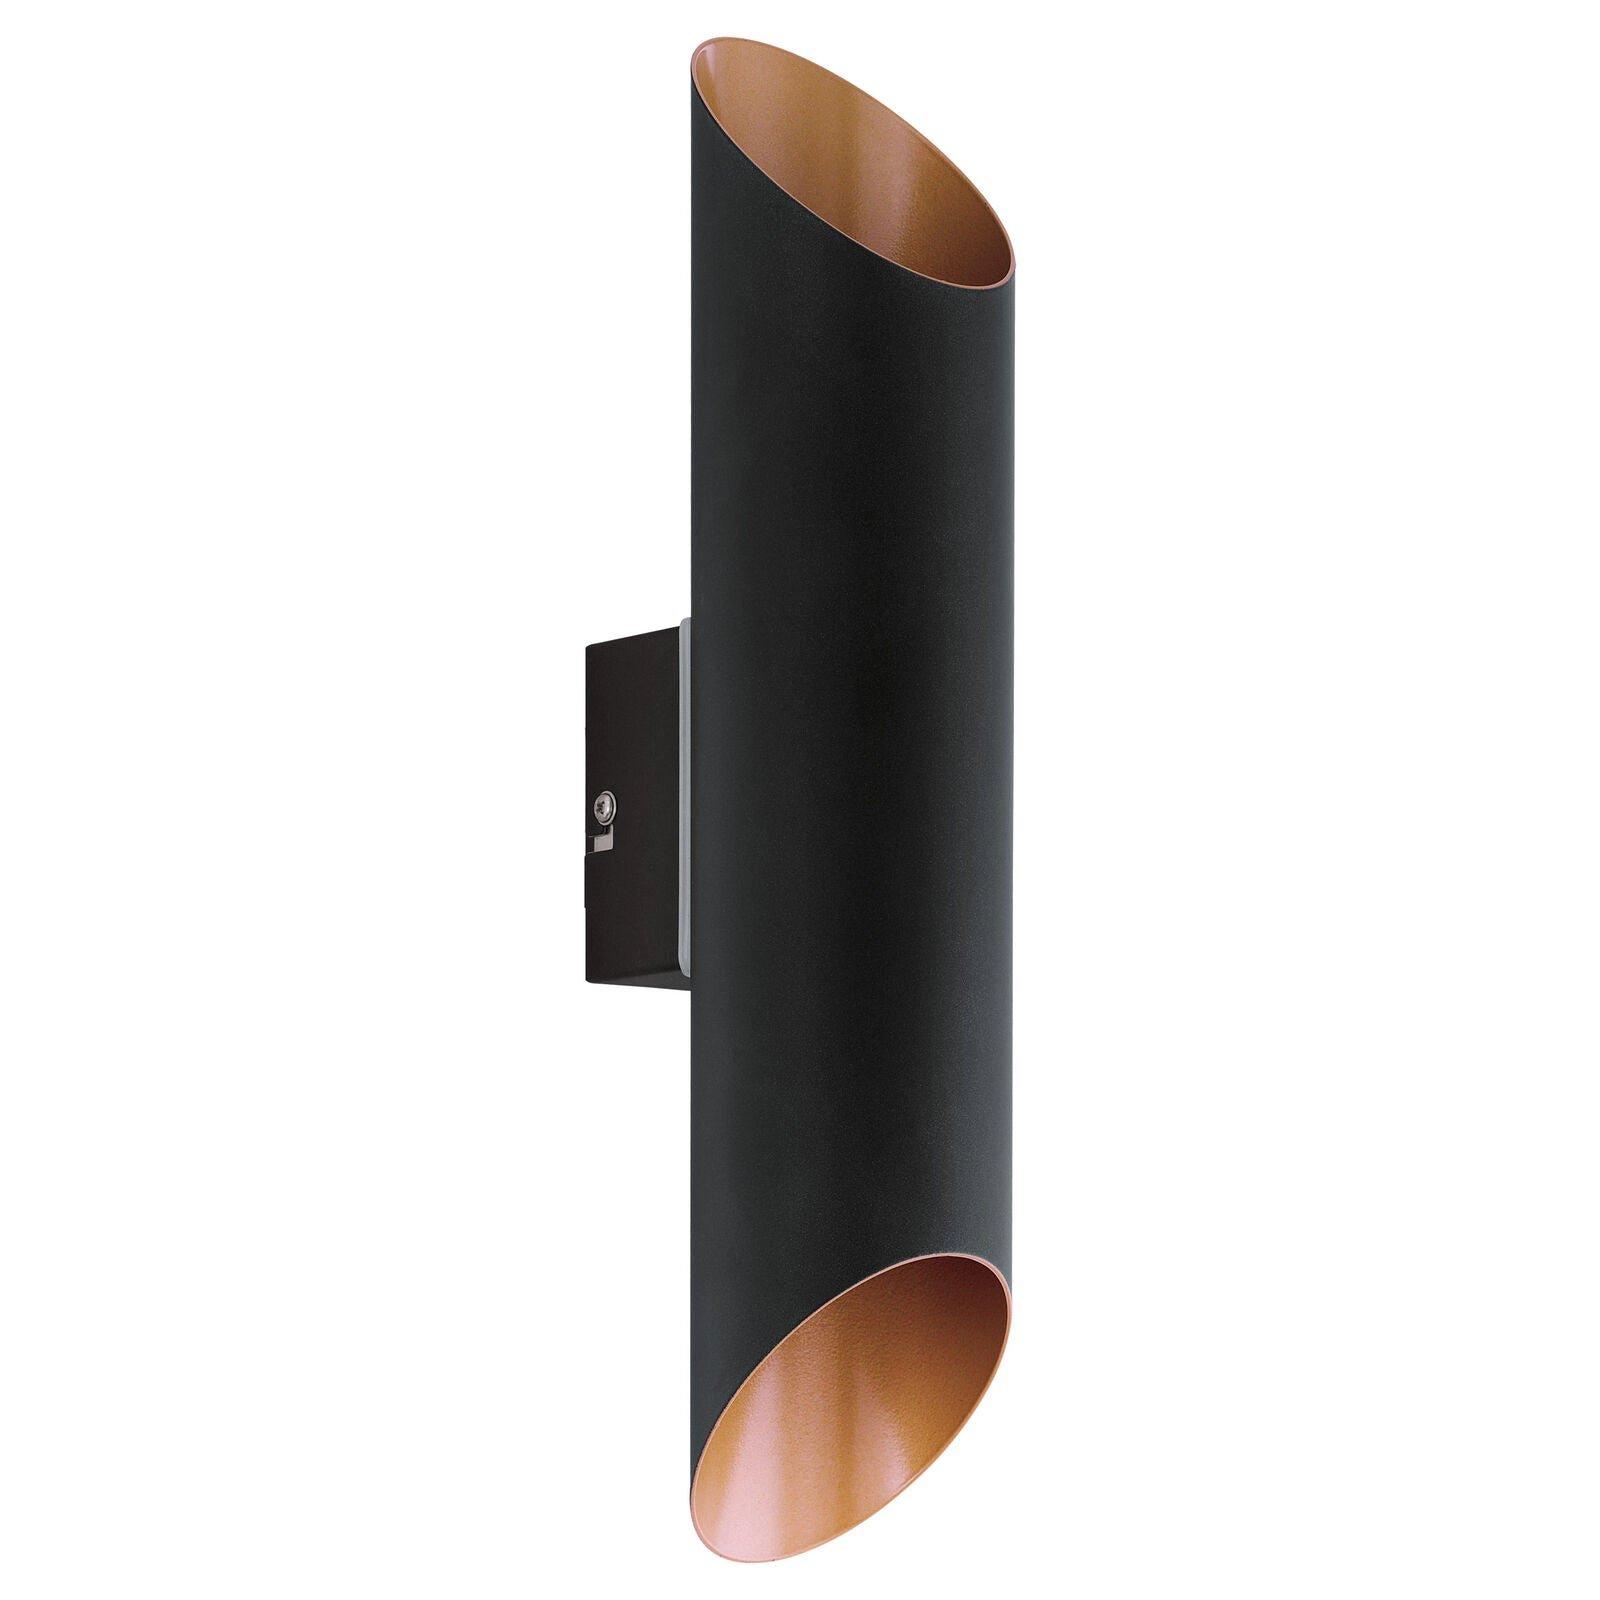 IP44 Outdoor Wall Light Black & Copper Modern Up Down Lamp 3.7W Built in LED